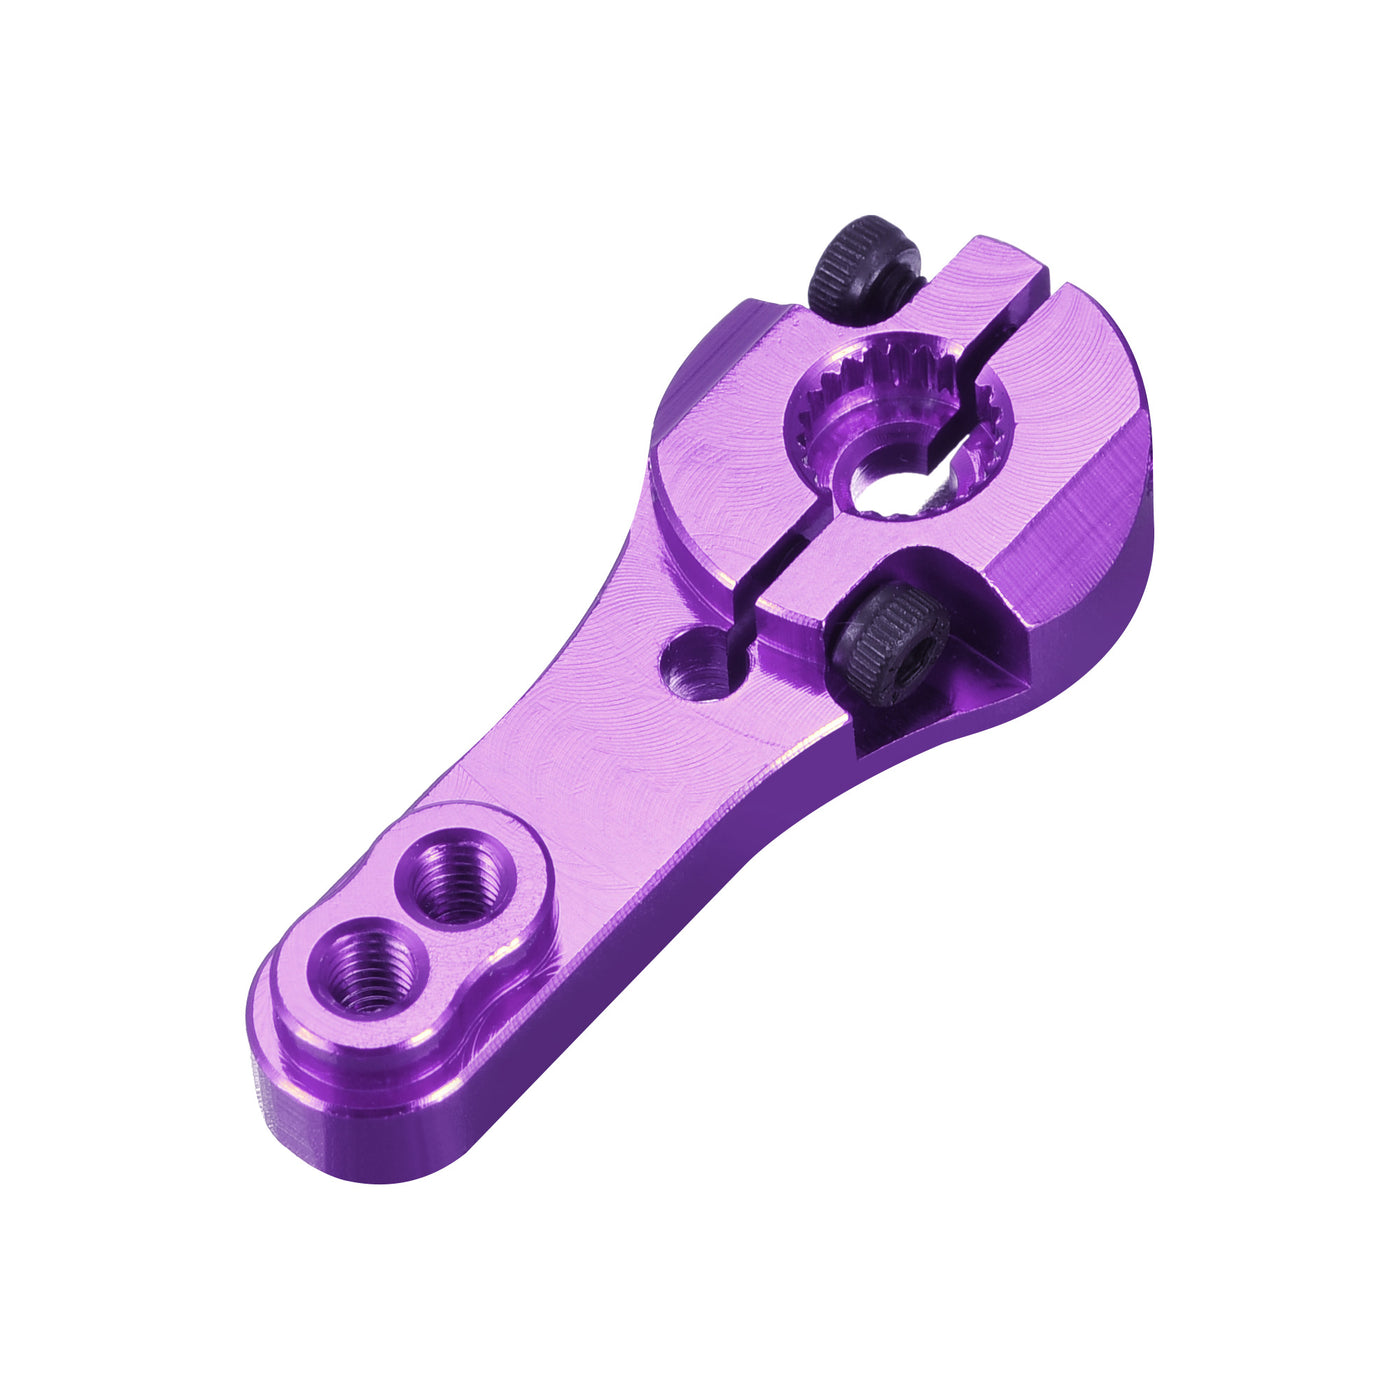 uxcell Uxcell 23T Aluminum Servo Horns Steering Arm for 3001 3005 3003 - Purple 2pcs